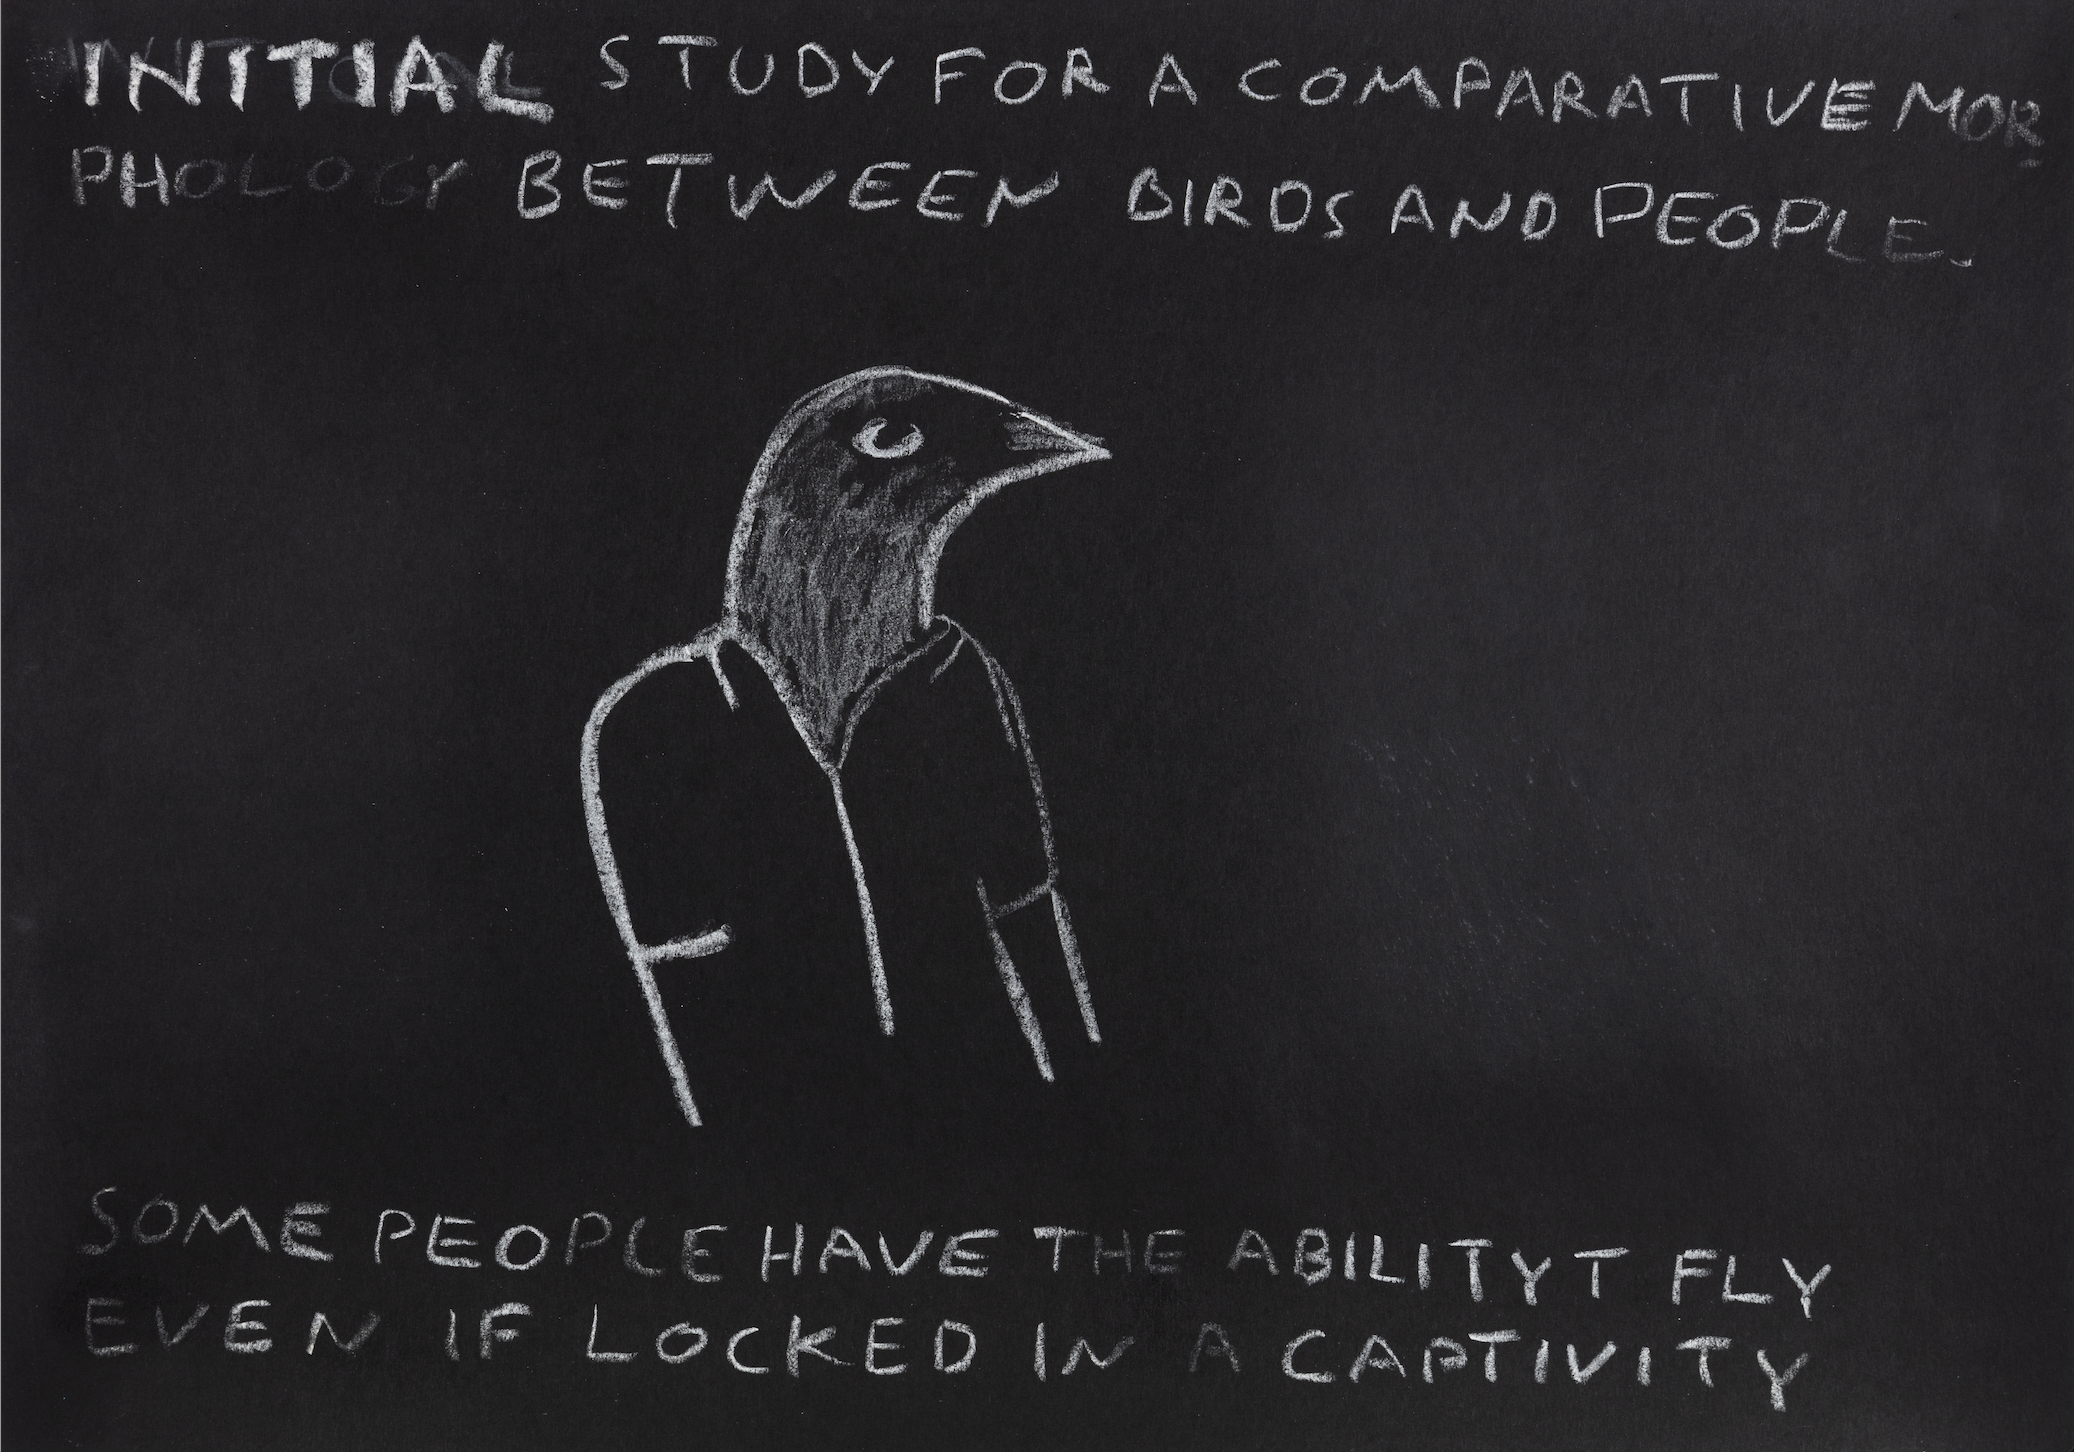 Paulo Nazareth - INITIAL STUDY FOR A COMPARATIVE MORPHOLOGY BETWEEN BIRDS AND PEOPLE [Some people have the ability t fly even if locked in a captivity], 2021